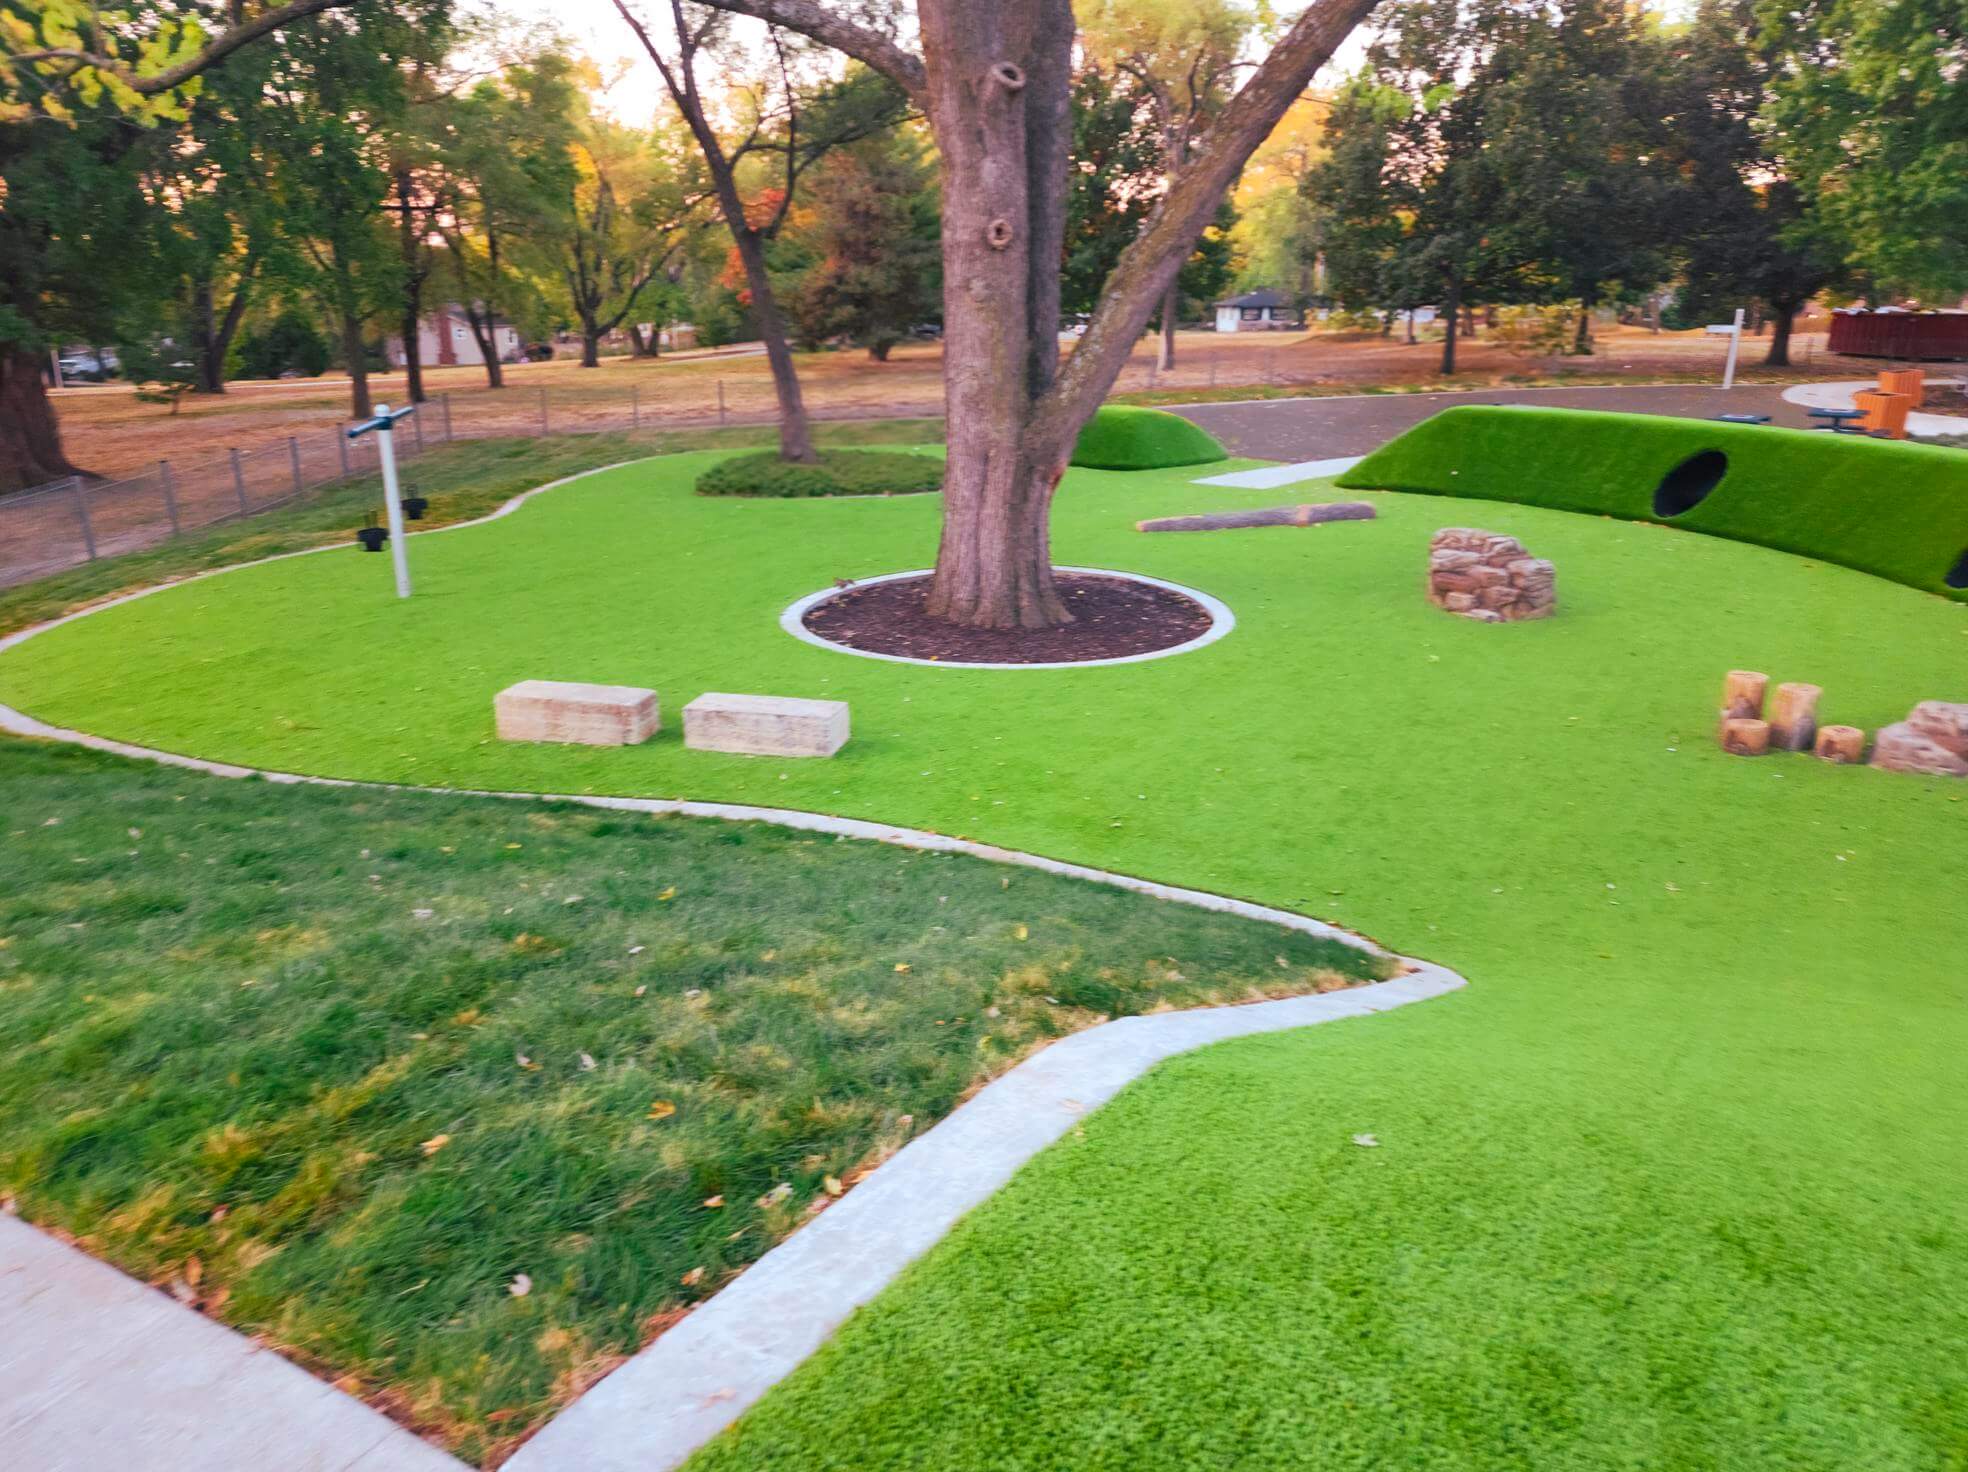 A sprawling playground featuring undulating green artificial hills, and a central tree.